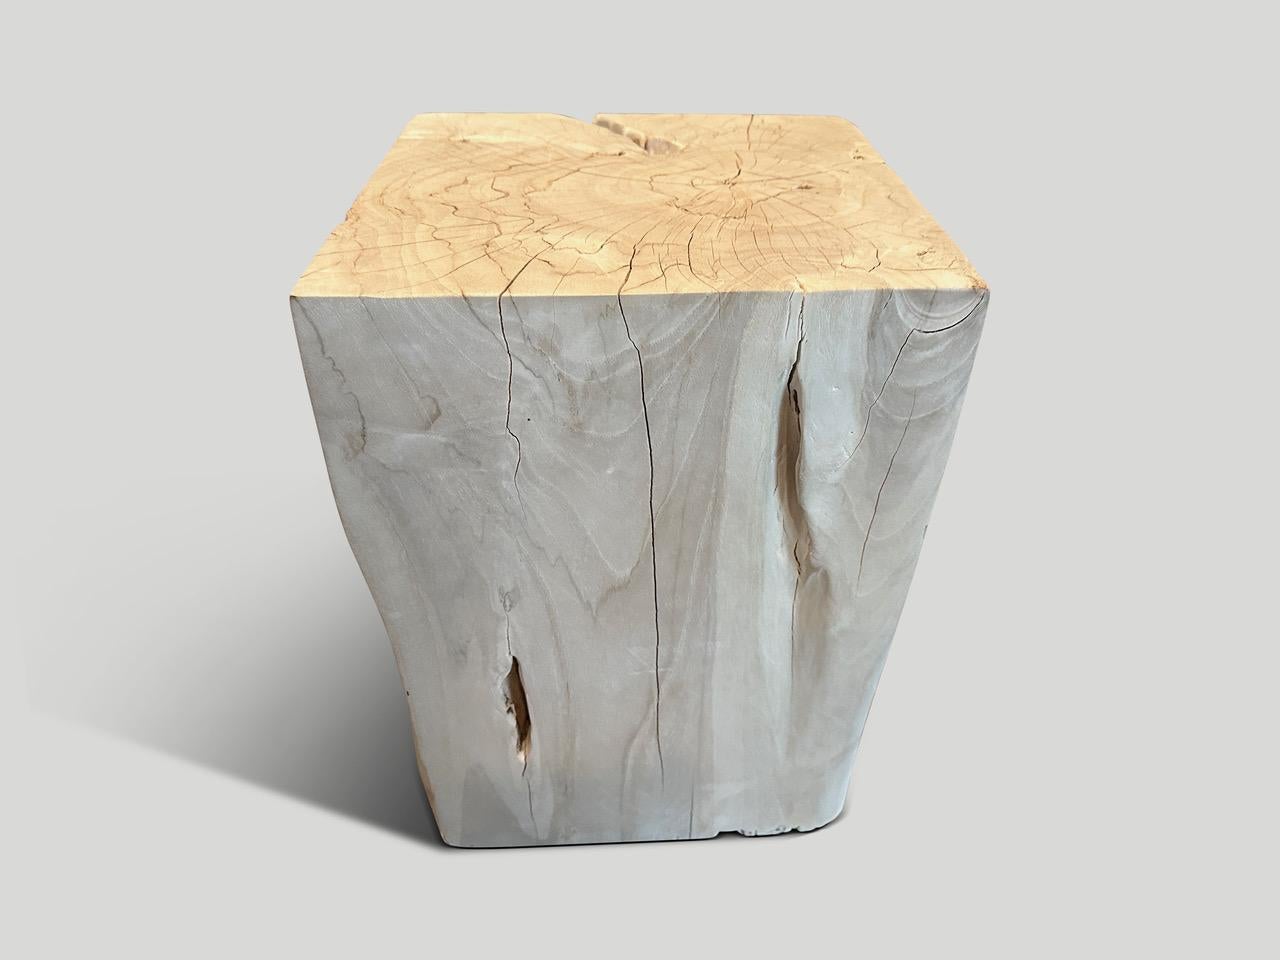 Andrianna Shamaris Bleached Teak Wood Side Table In Excellent Condition For Sale In New York, NY